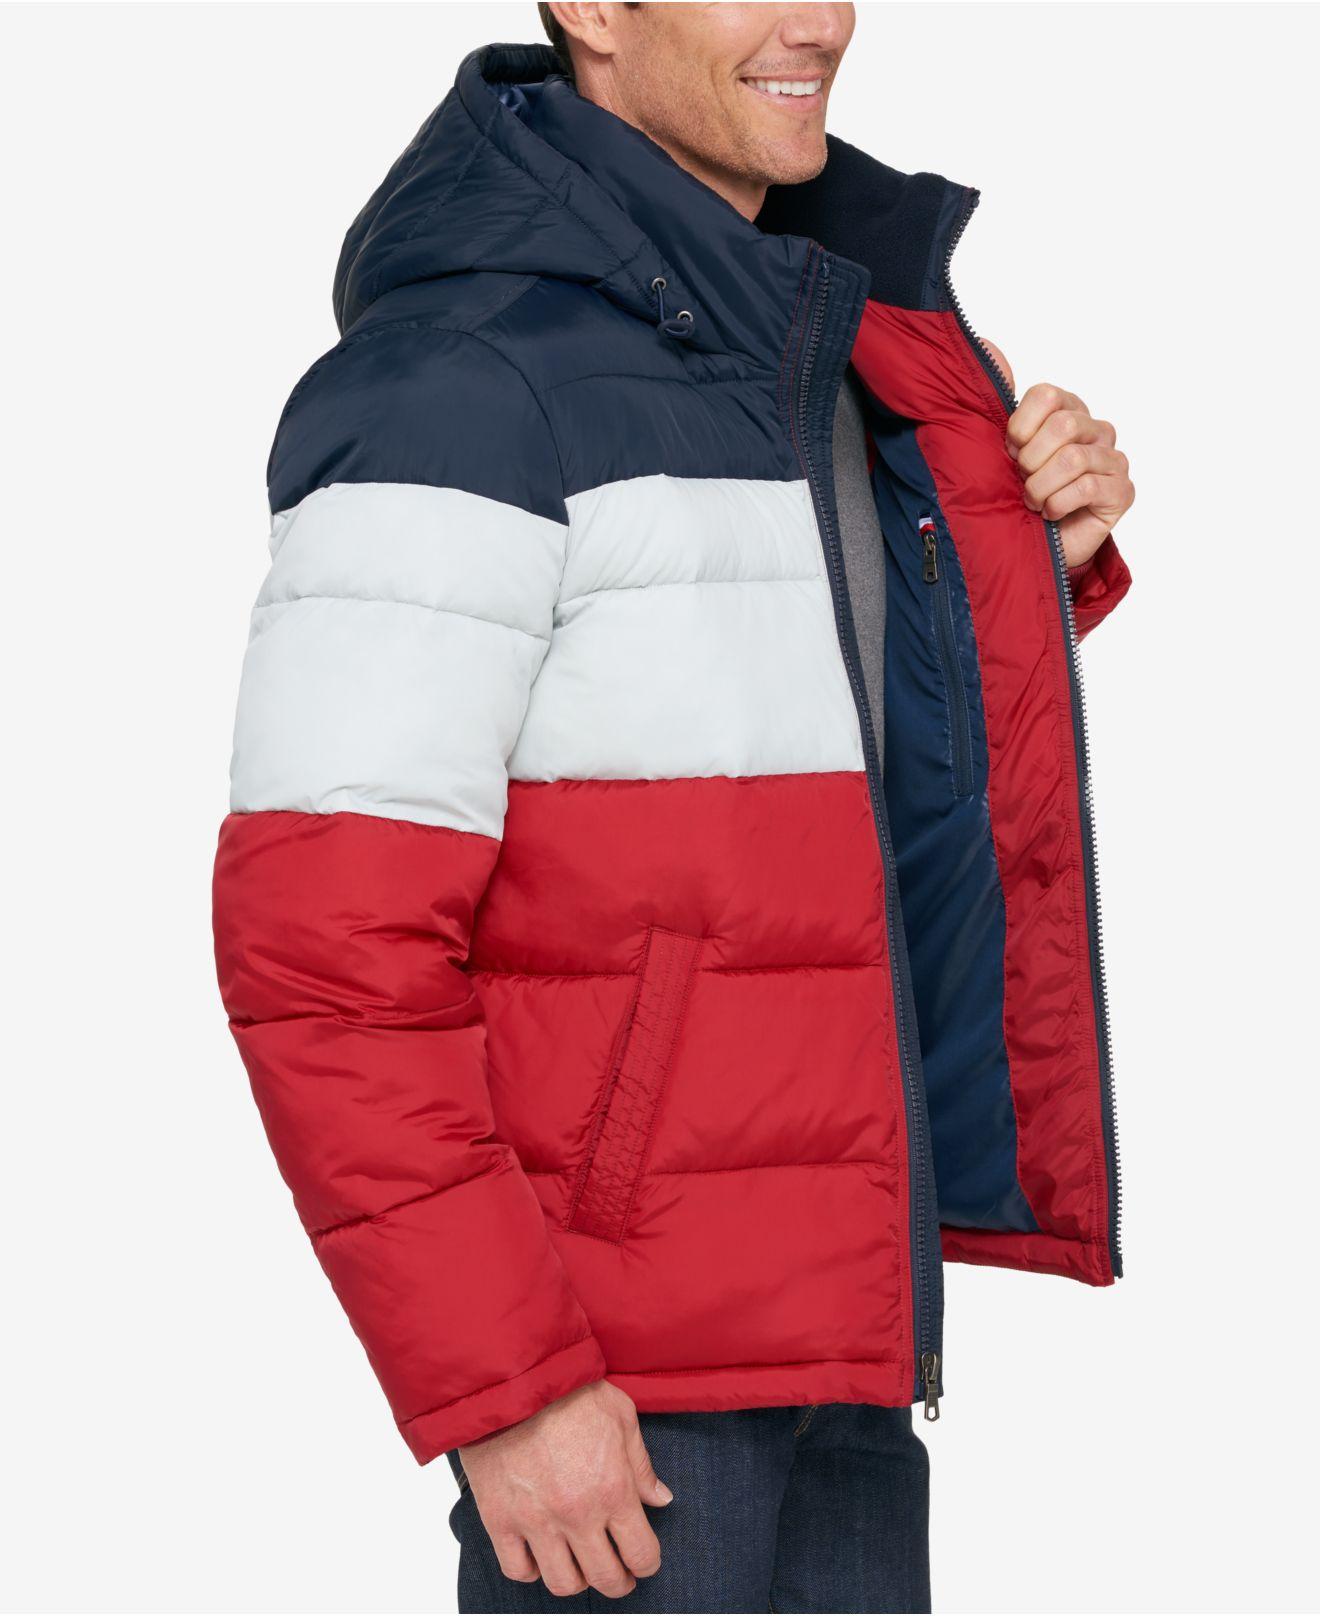 tommy hilfiger puffer jacket red white and blue